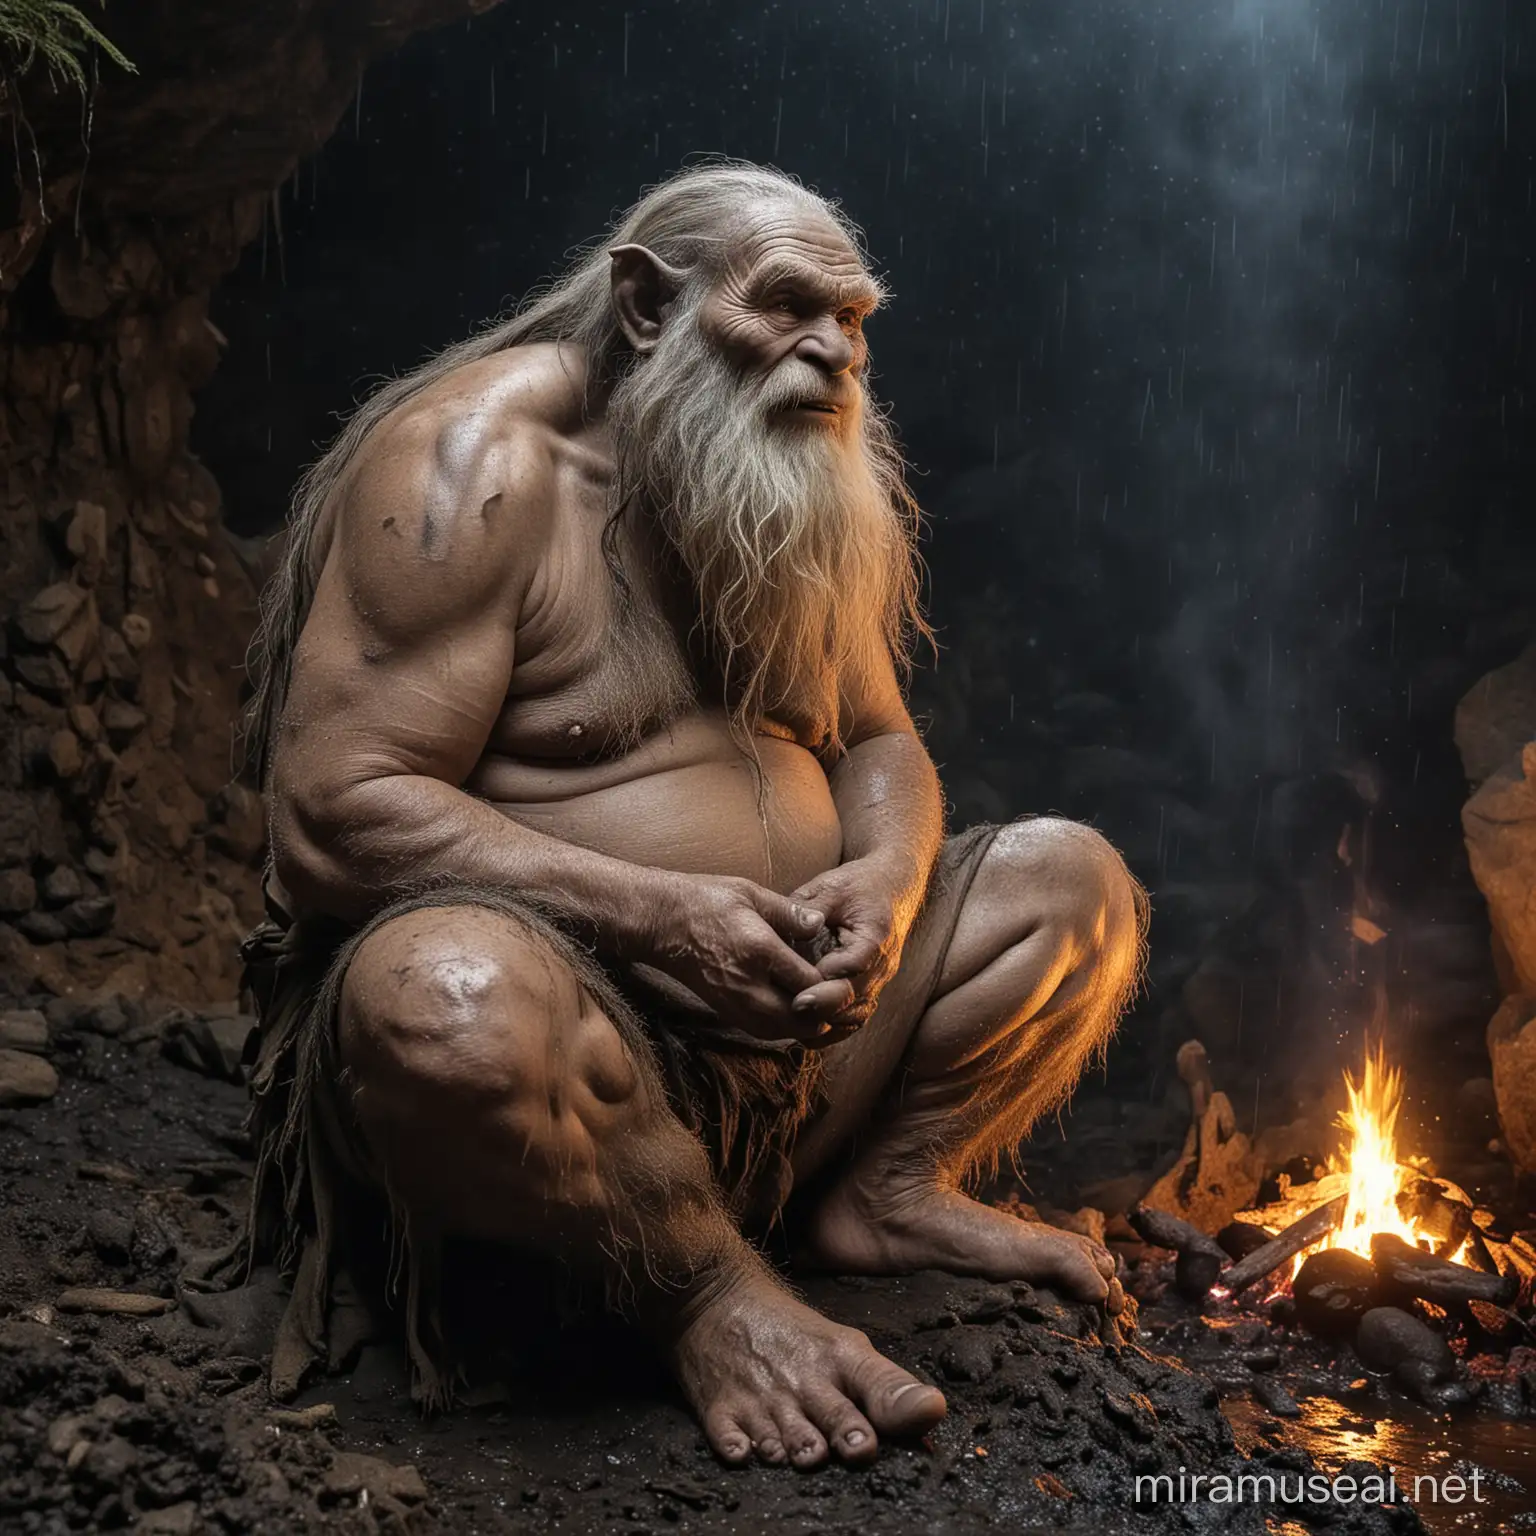 troll,forest cave,at midnight,bonfire,large feet,large hand,loincloth,dumpy,chubby,primitive,hairy,long beard,old age,sitting on the ground,rainy,wet dirty black mud cover hand and feet